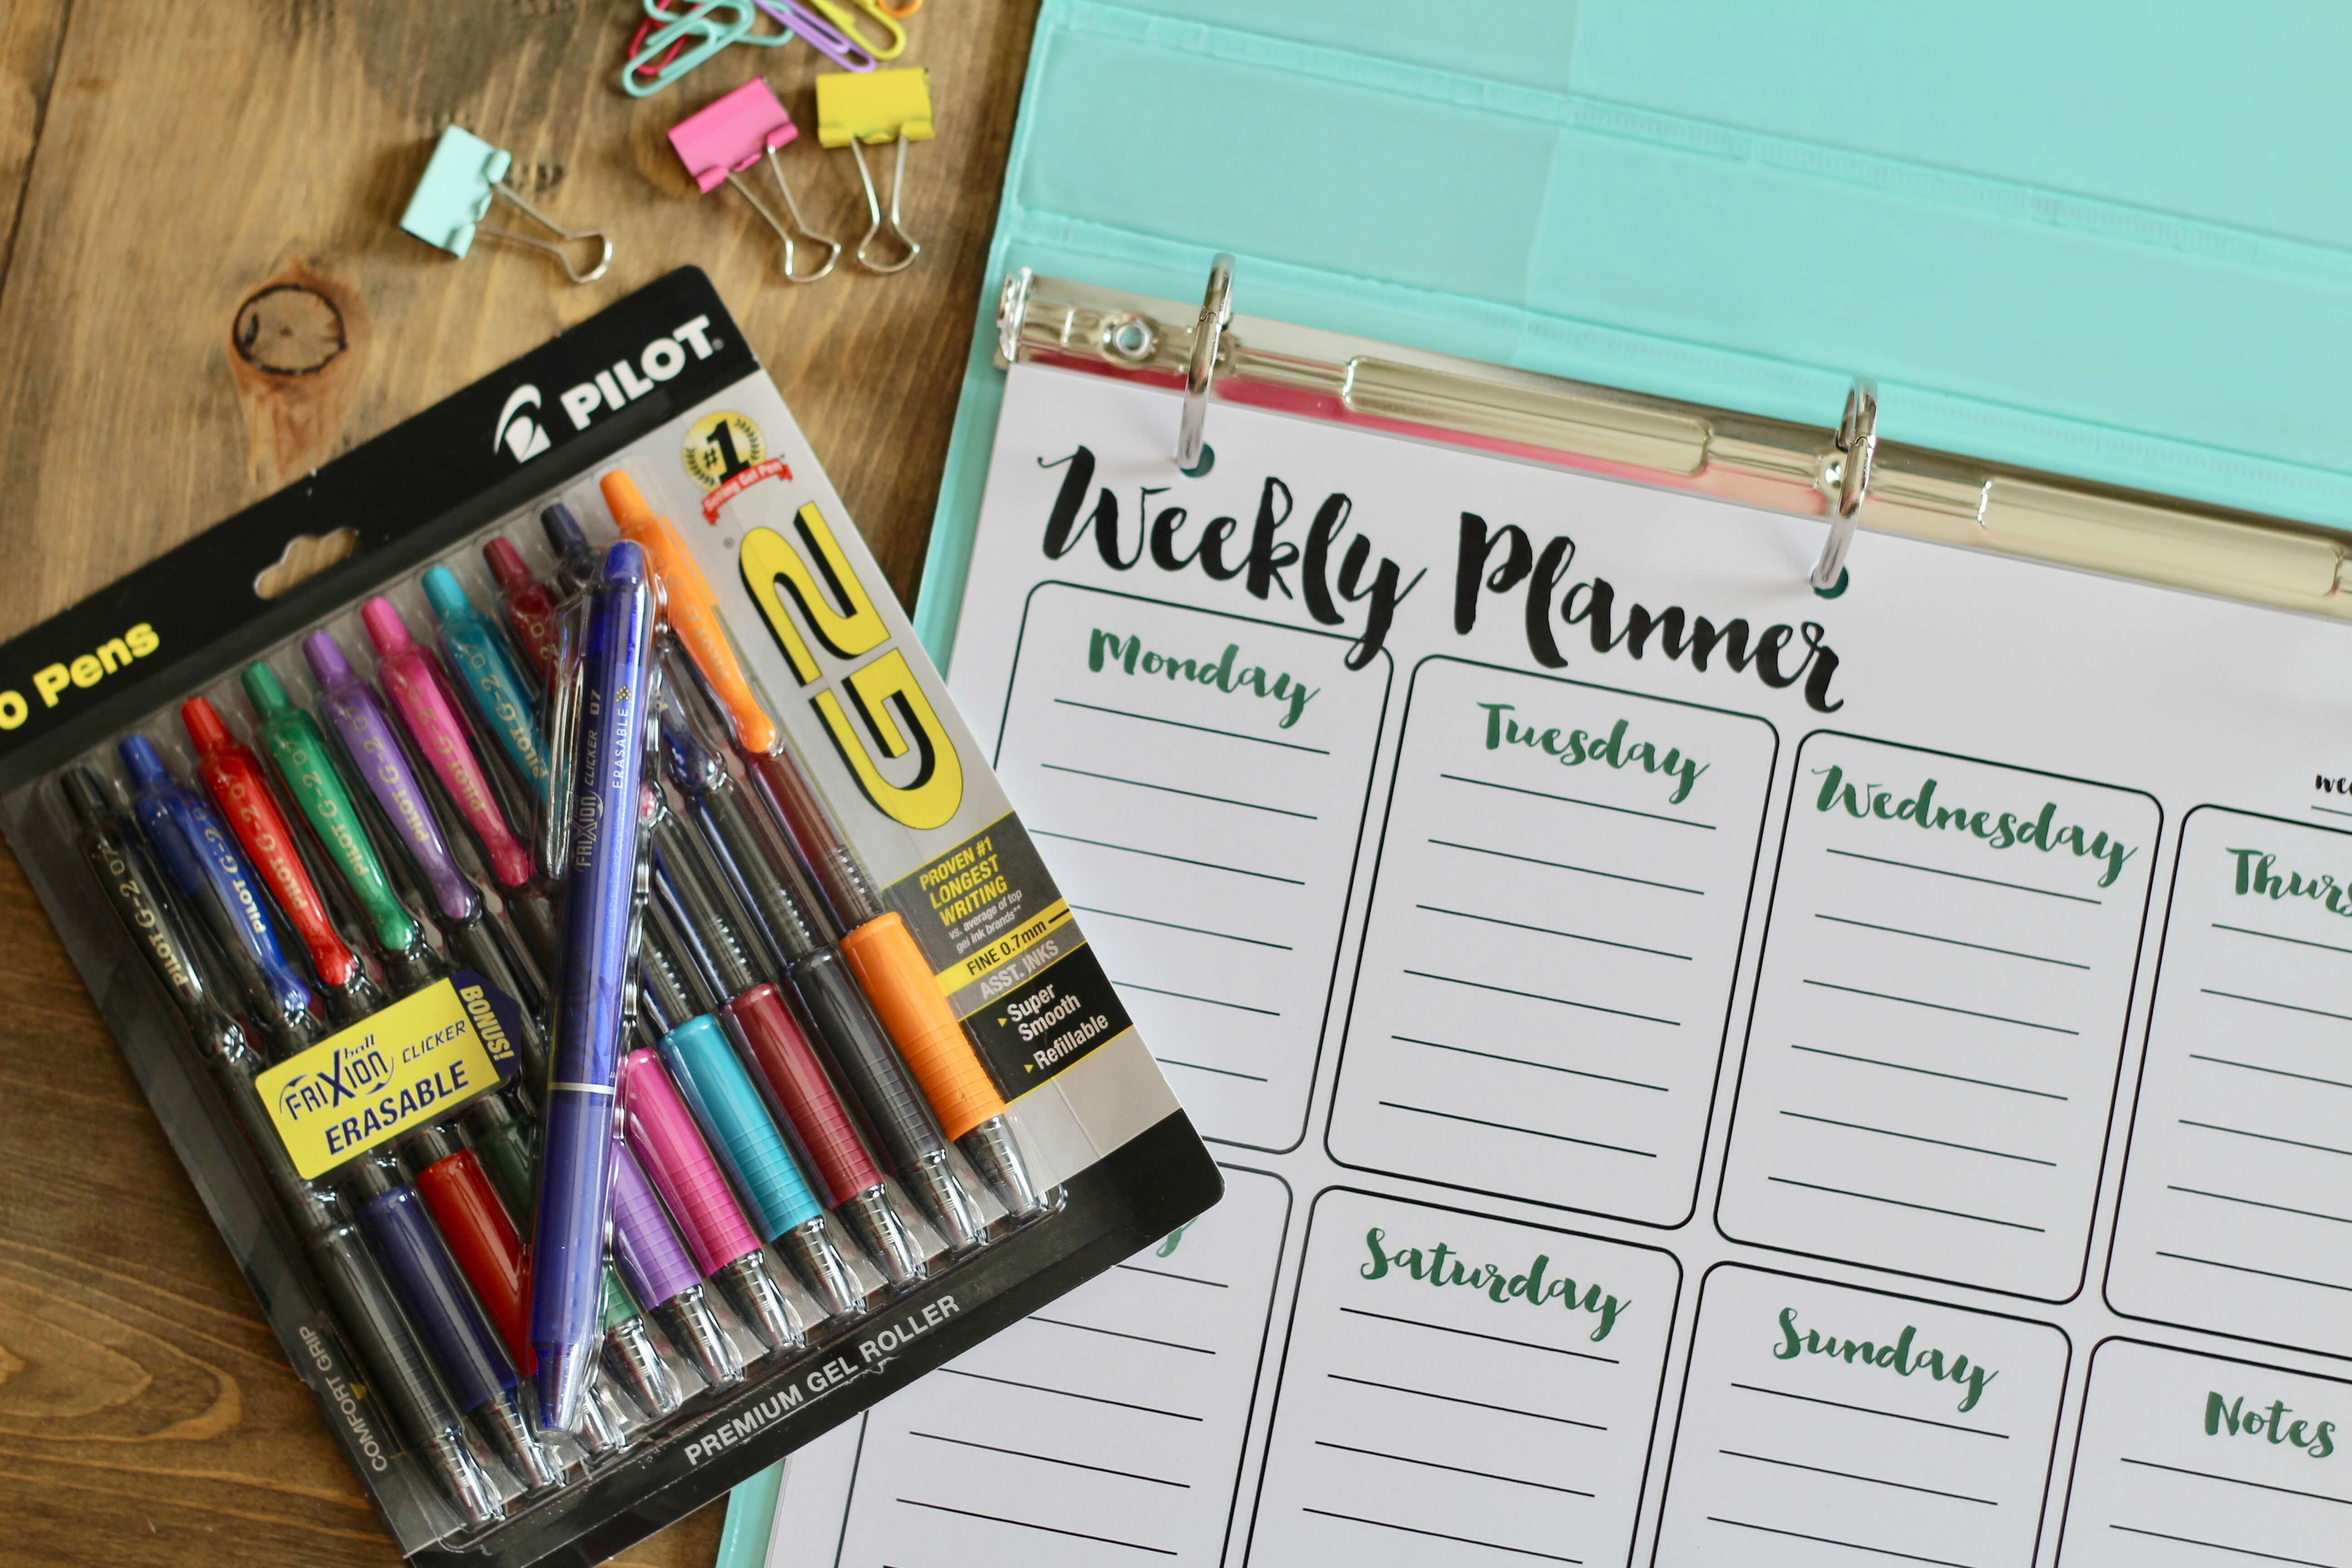 Everyday Party Magazine Printable Weekly Planner, Free Printables, Calendar, Day Planner